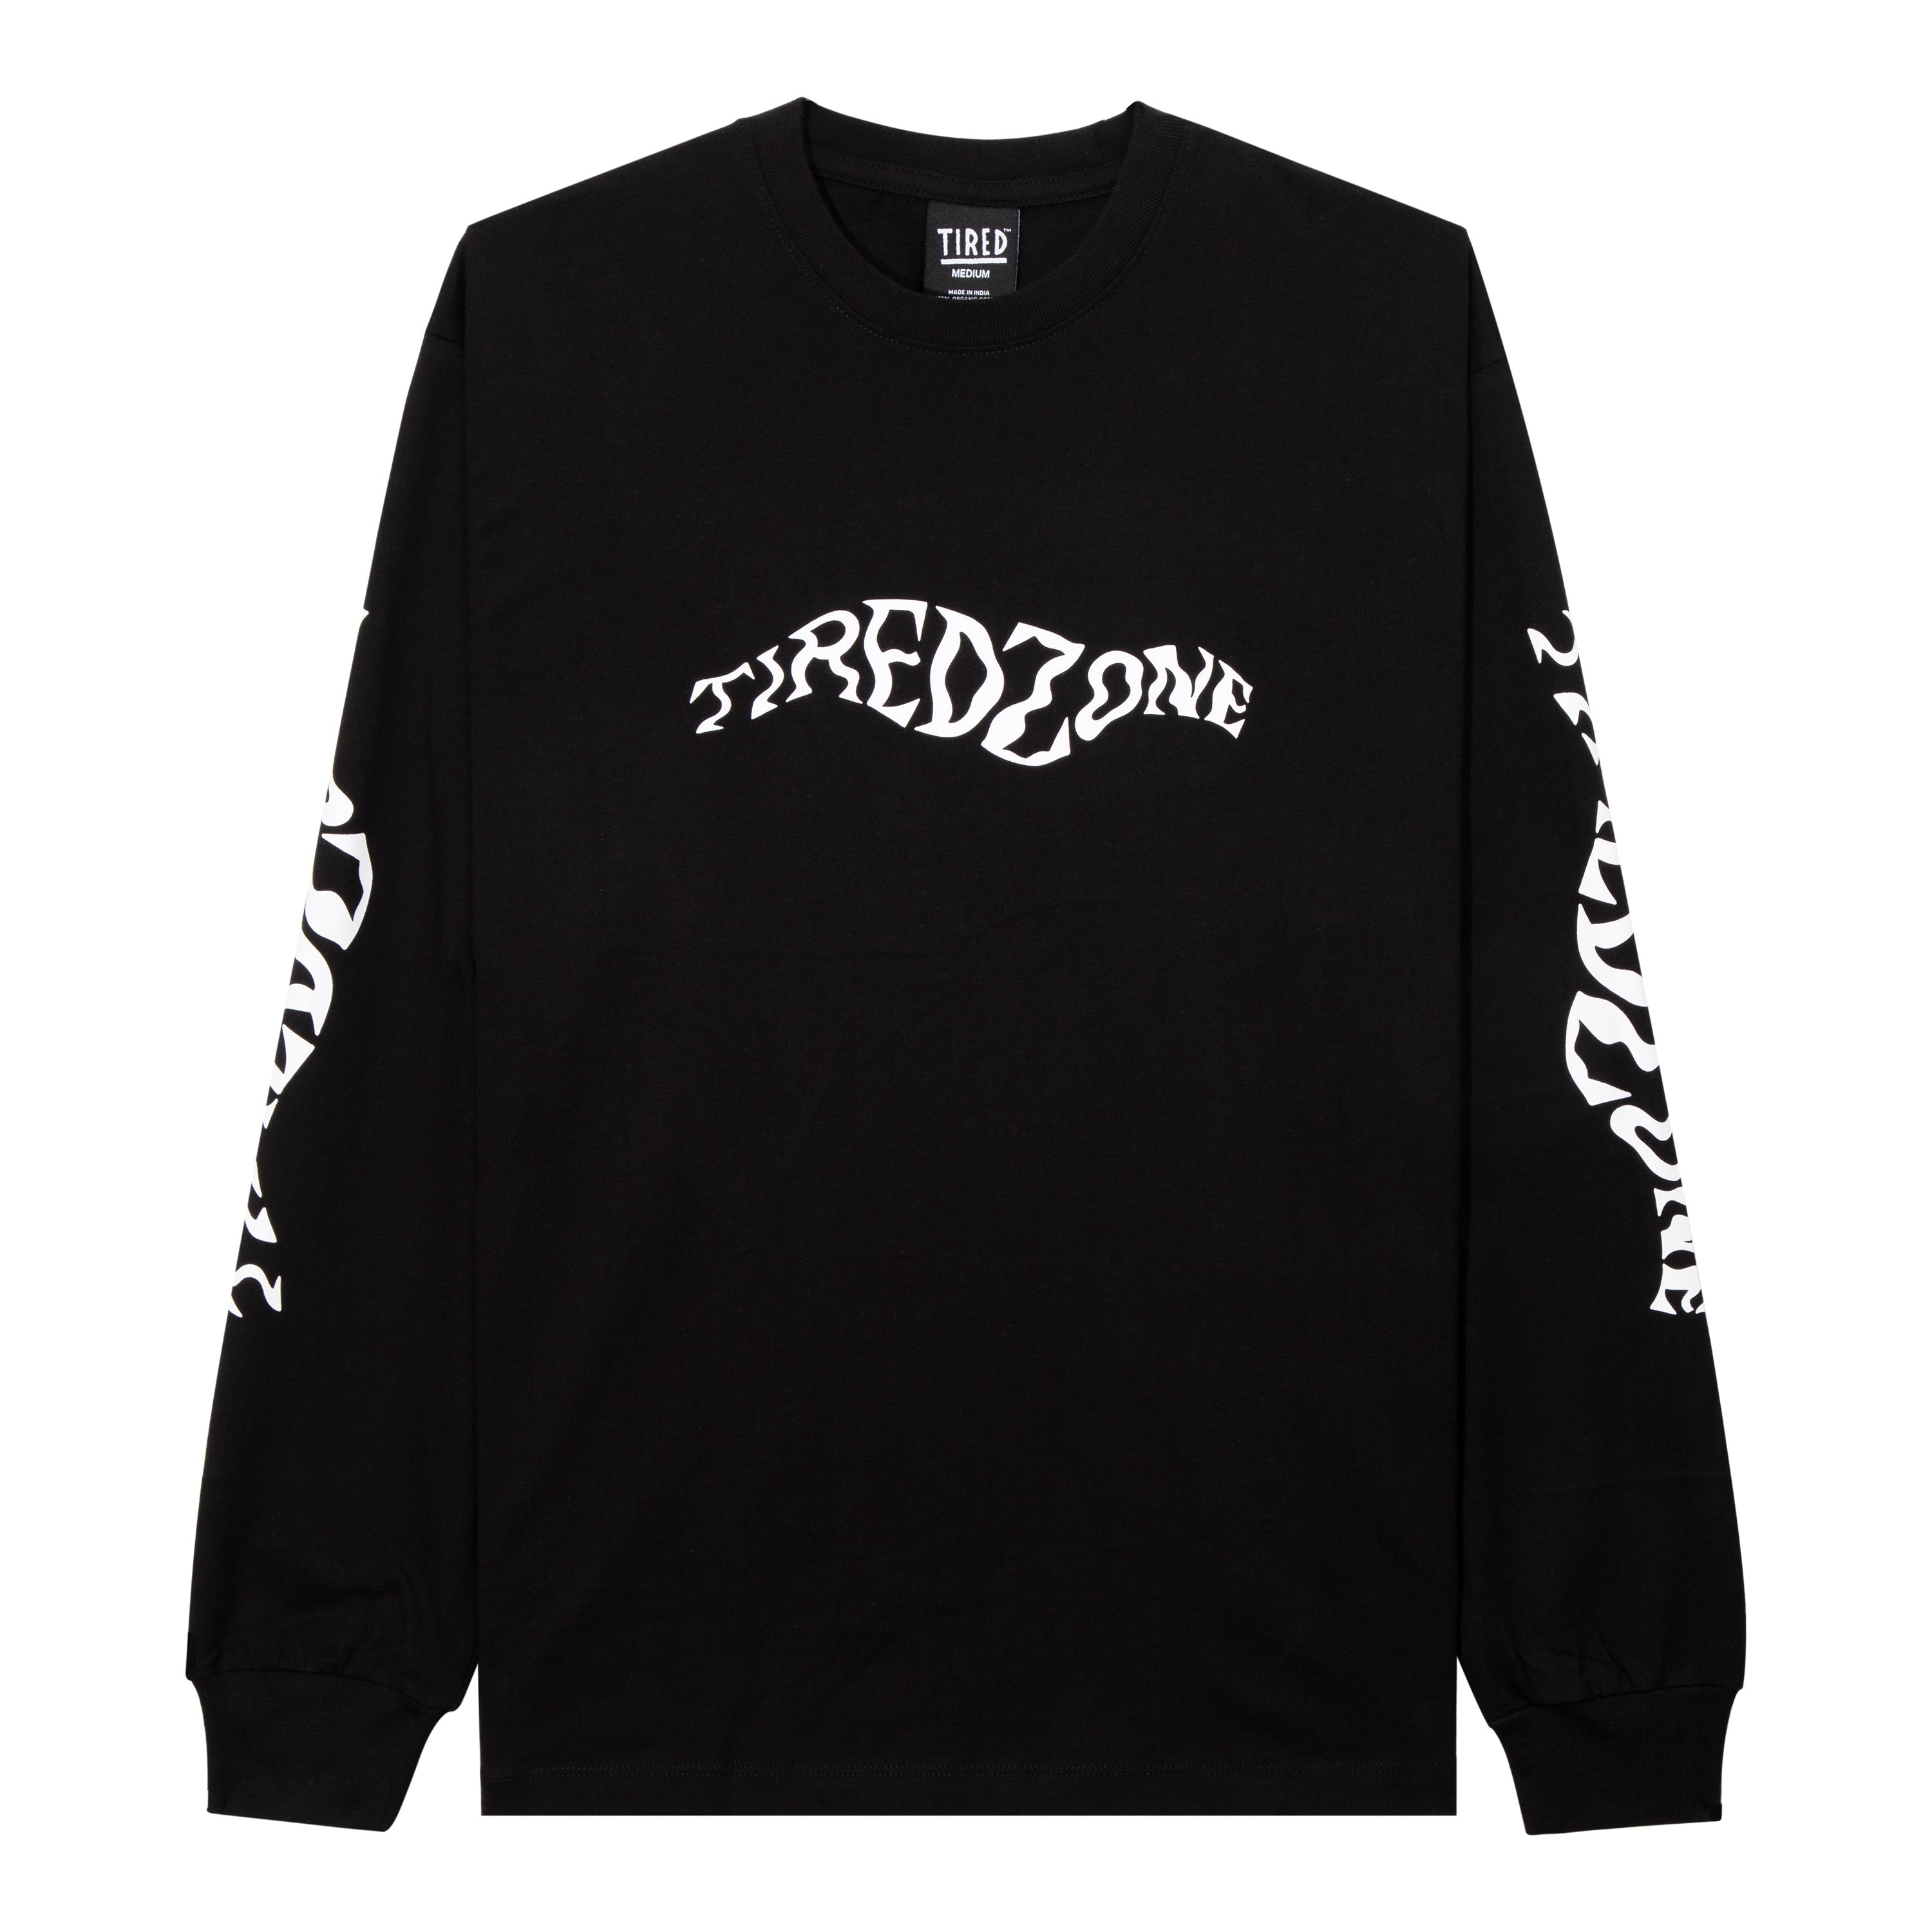 TIRED ZONE LS TEE – Tired Skateboards JP